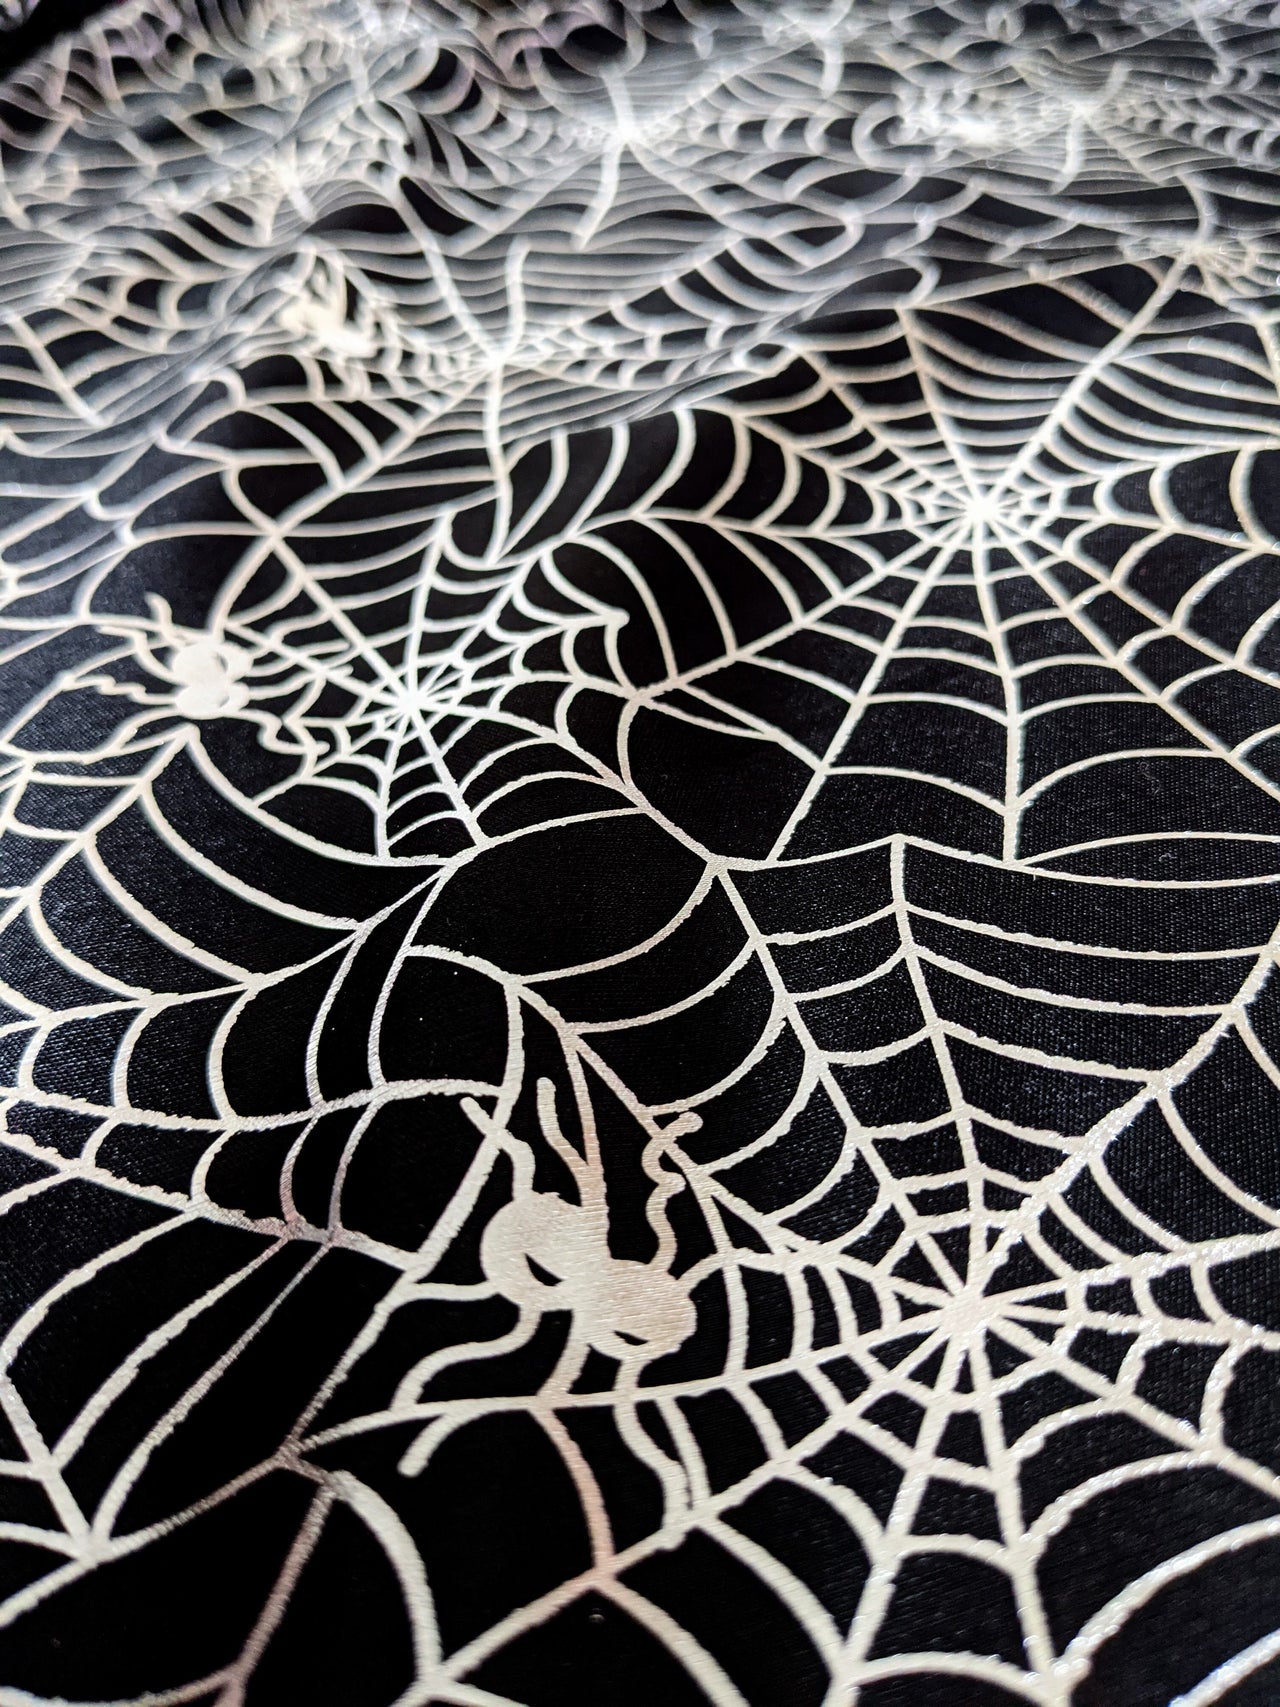 Black And Silver Halloween Spider's Web Foil Fabric, Halloween Fabric, 58 Inches Wide